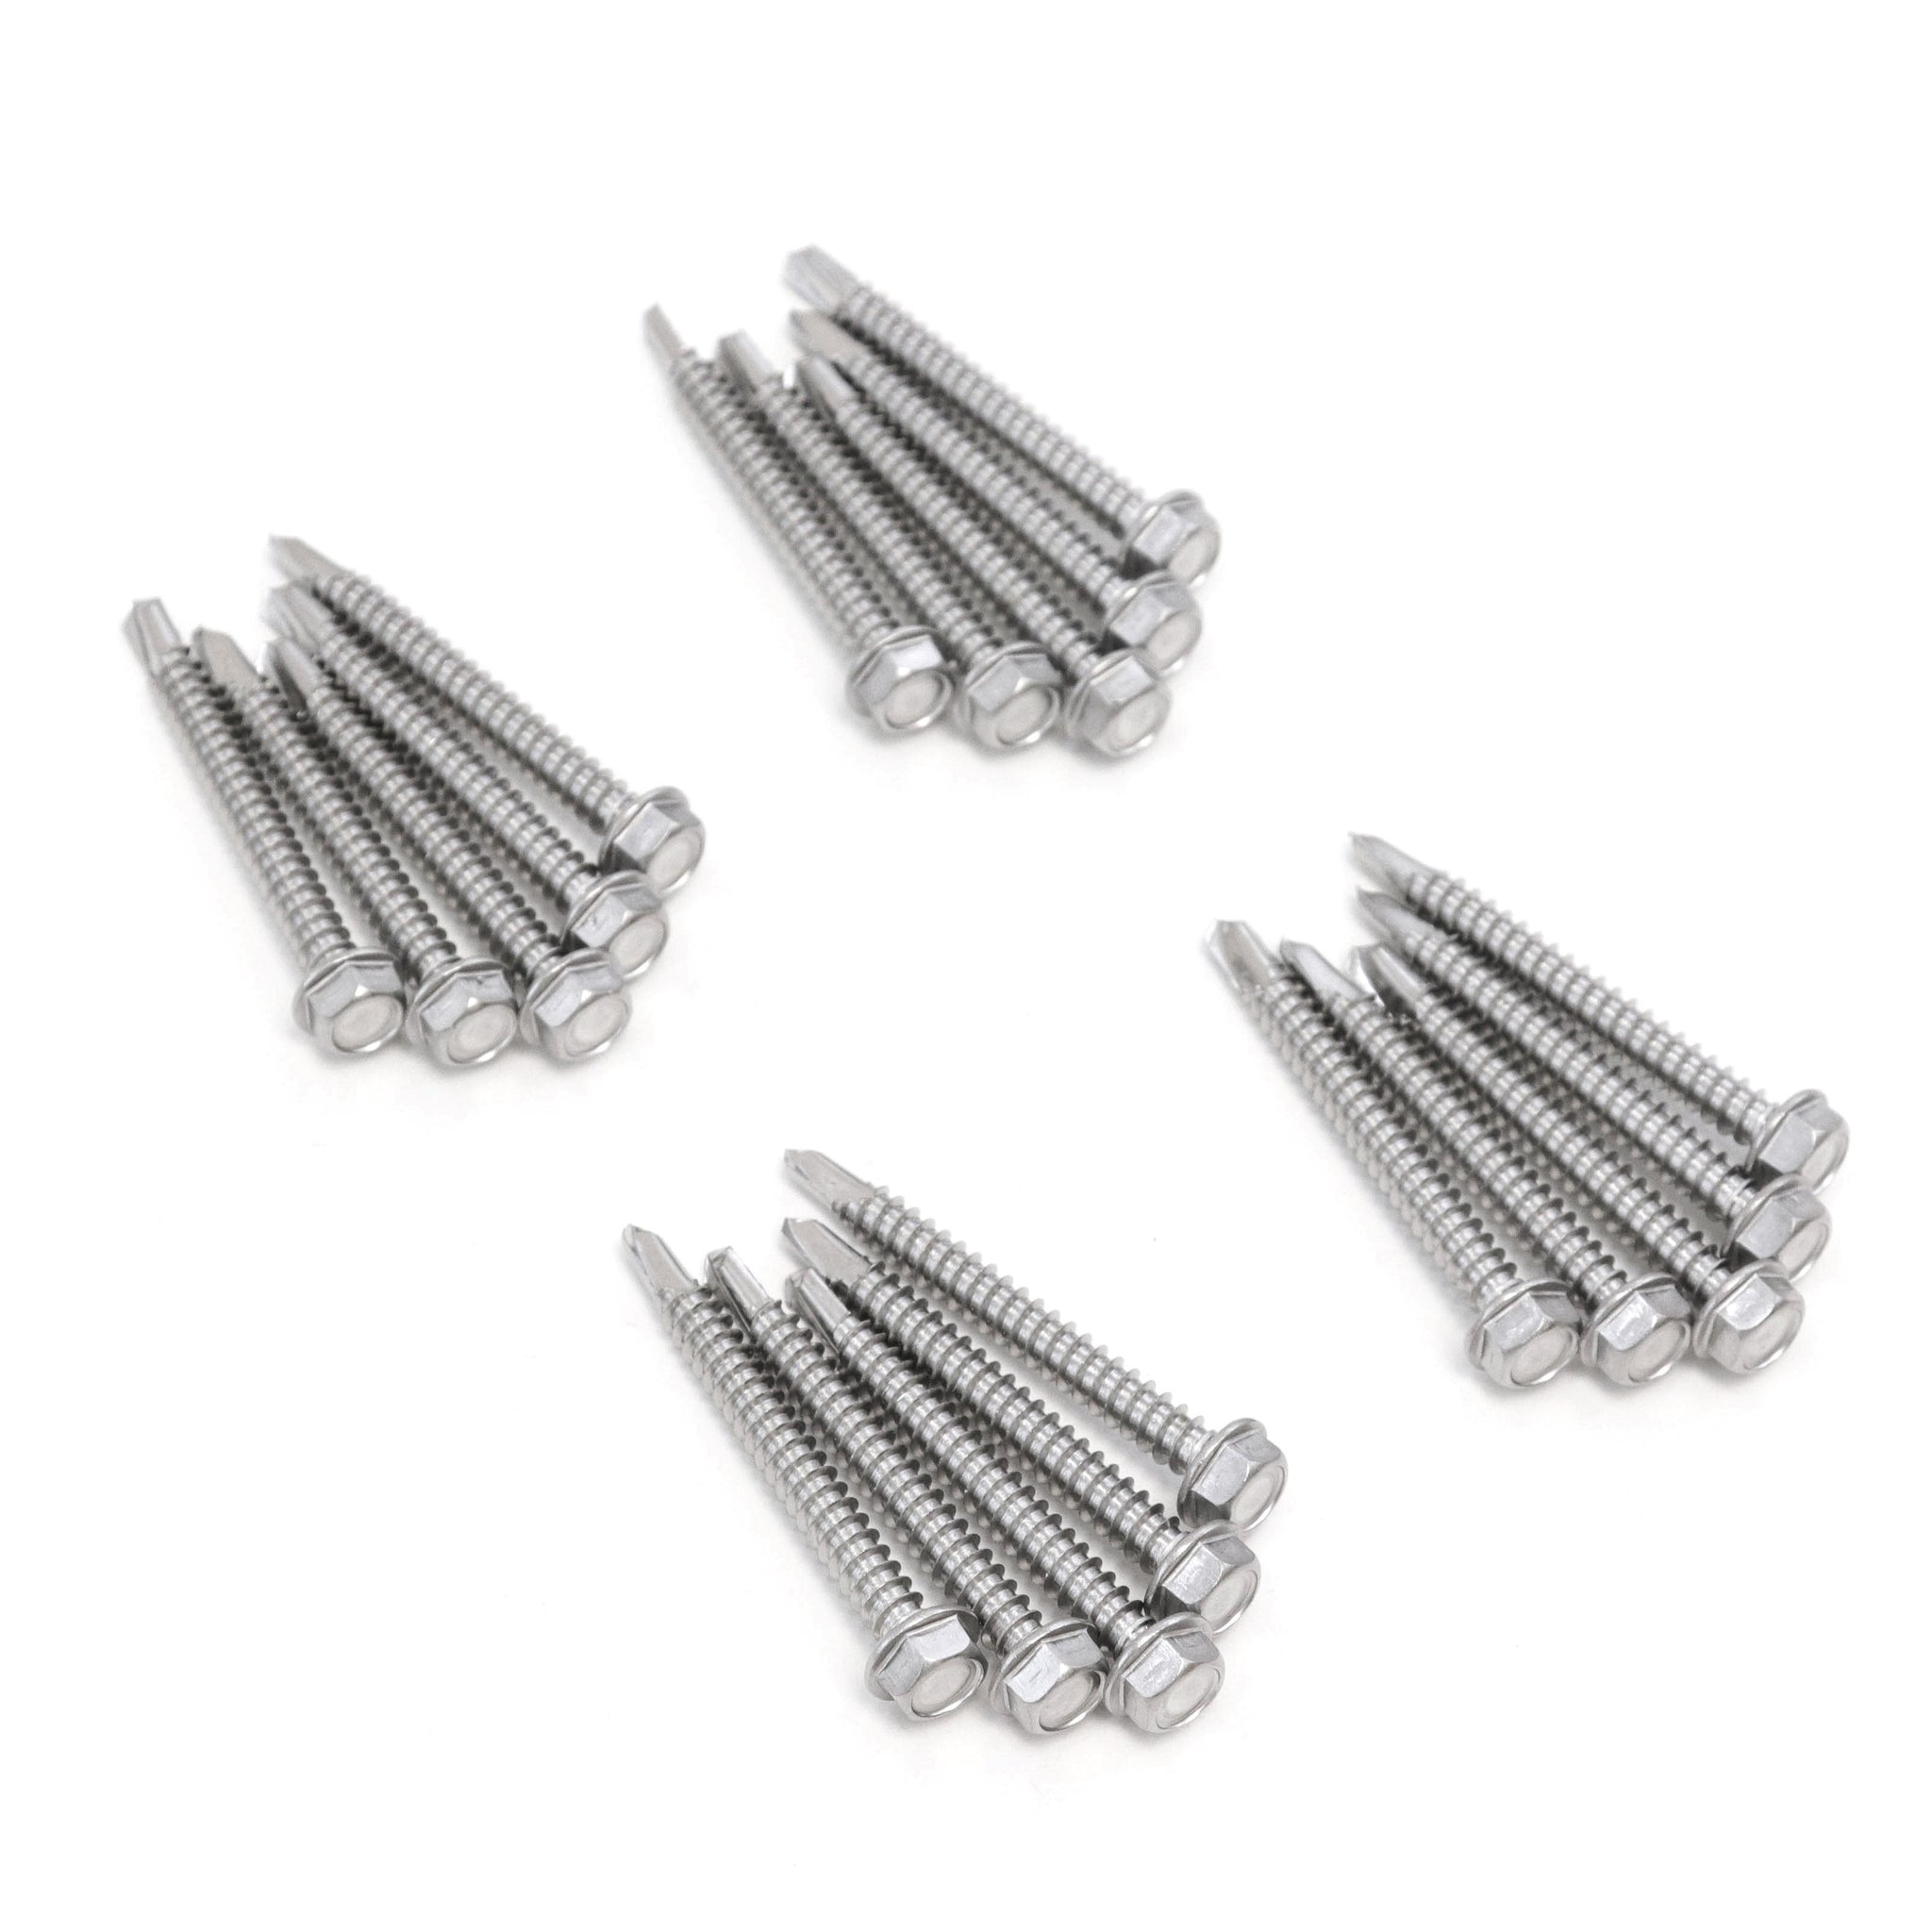 Red Hound Auto 20 Marine Hex Head Self Drilling Screw Set Number 12 x 2 Inches for Wood Metal Plastics 305 SS Stainless Steel Corrosion Resistant